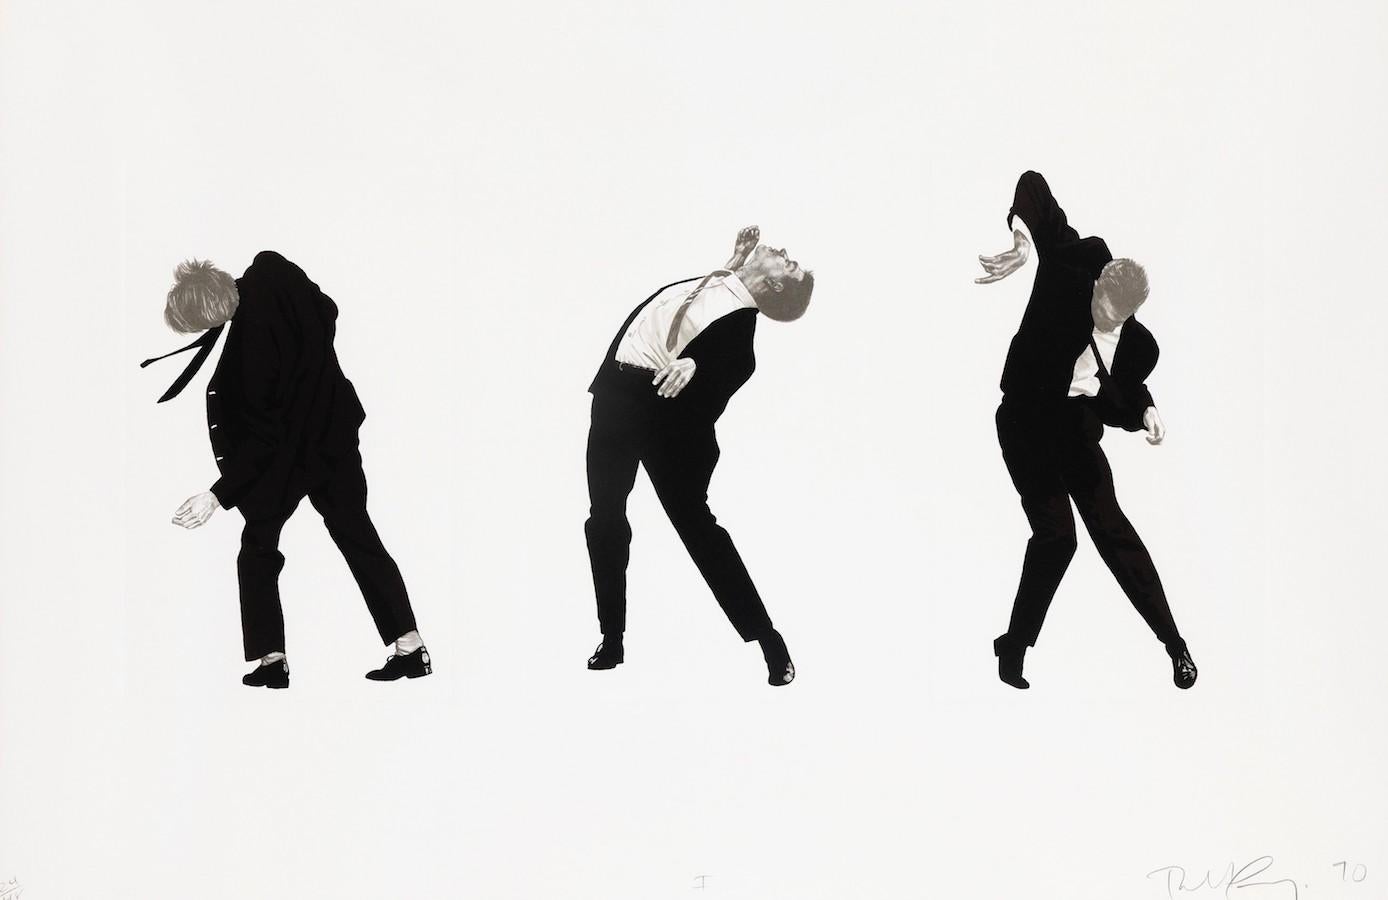 One of the rare horizontal Men in the Cities prints, Robert Longo created this remarkably vibrant and fun original lithograph in 1990.  Signed, dated and numbered in pencil, it measures 26 x 40 in. (66 x 101.6 cm.), unframed and is from the edition